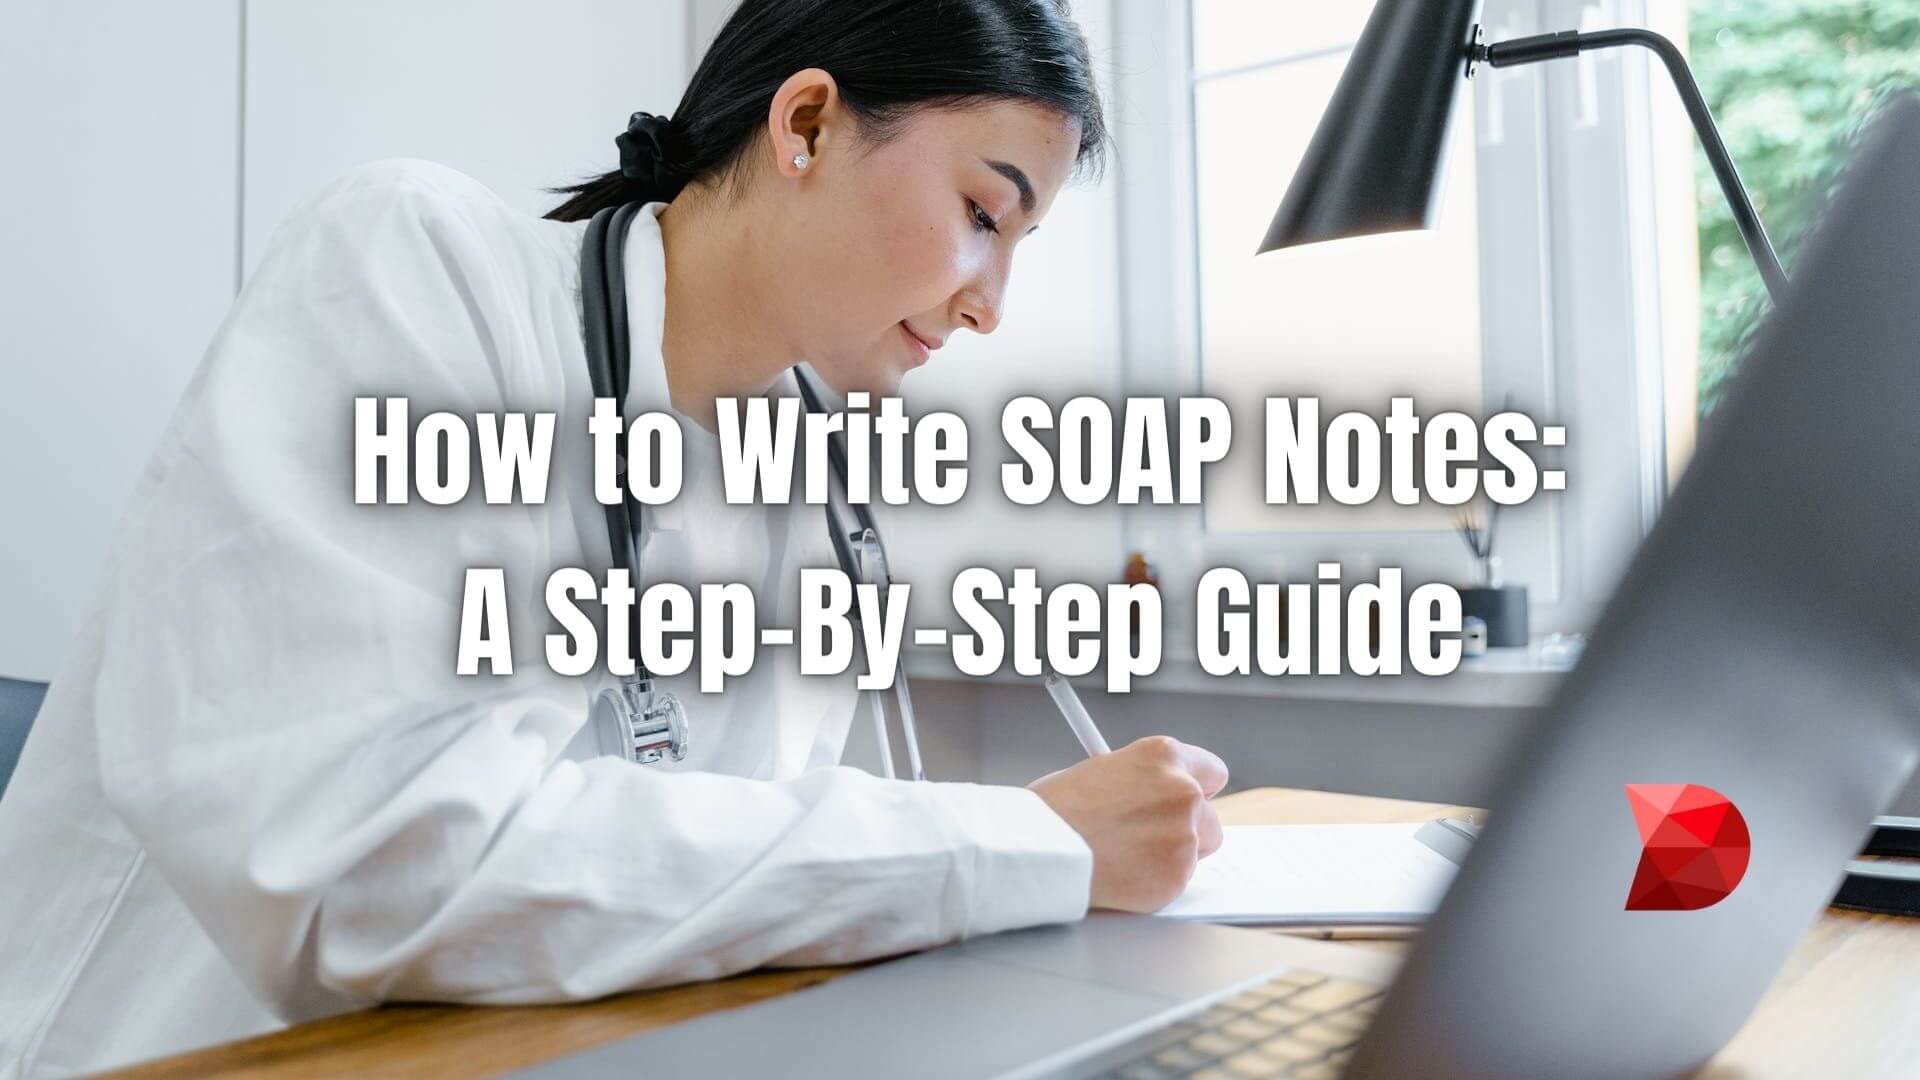 This article will discuss SOAP notes and offer an example of how to write them effectively. Click here to learn the step-by-step guide!